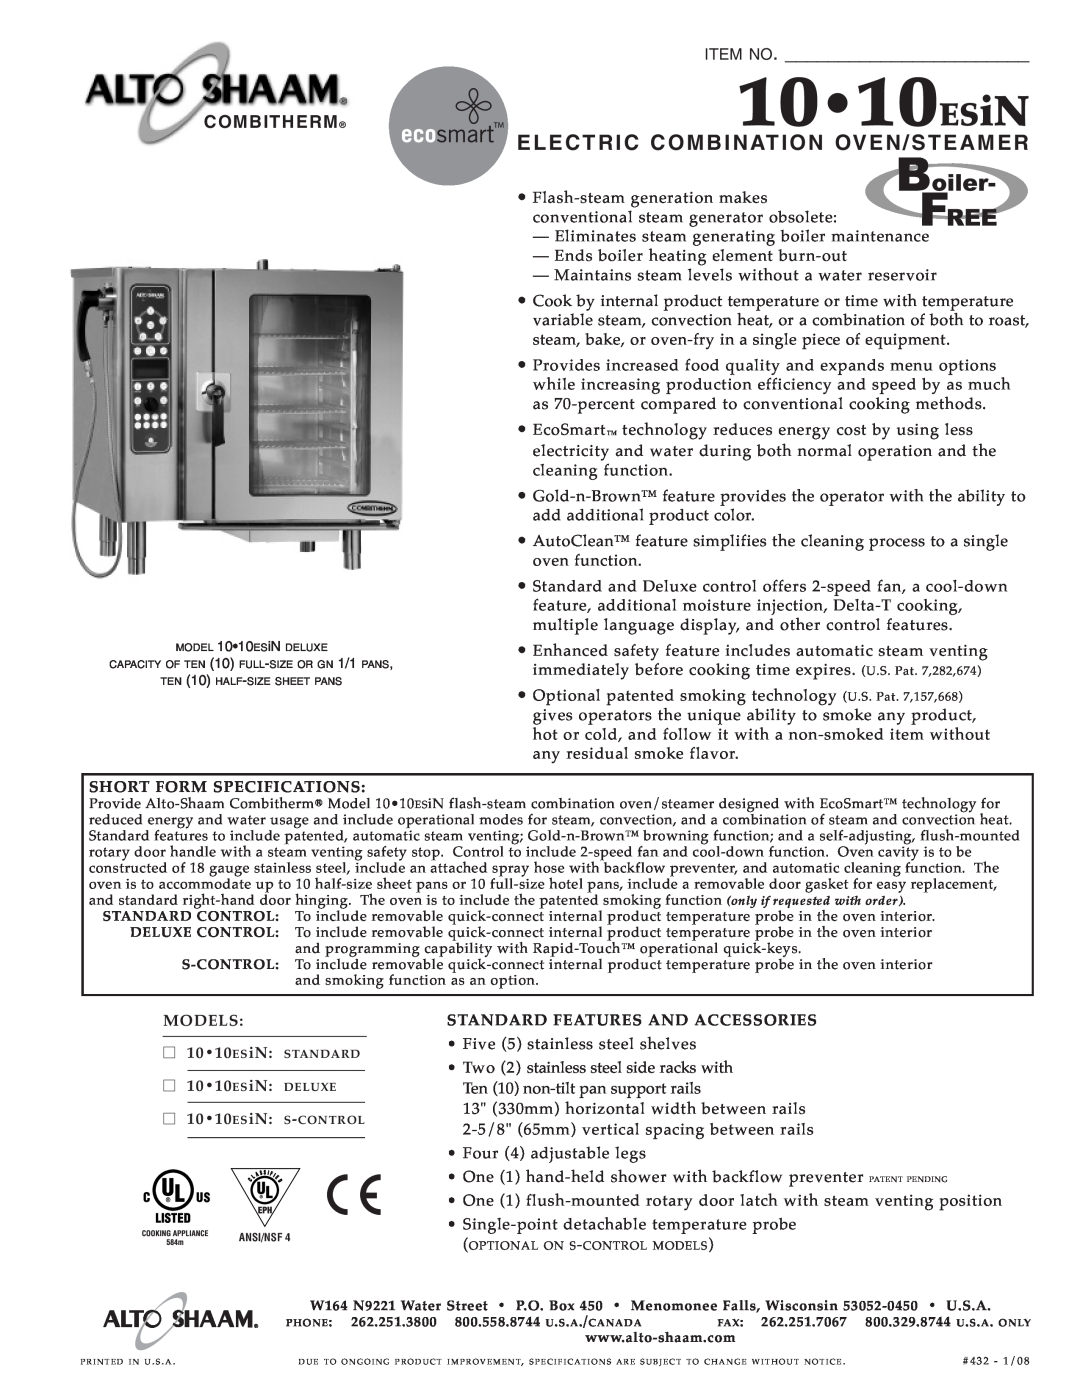 Alto-Shaam 10-10ESiN specifications 1010ESiN, Elect Ric Combina Tion, Oven/S Teame R, Item No, Combitherm 